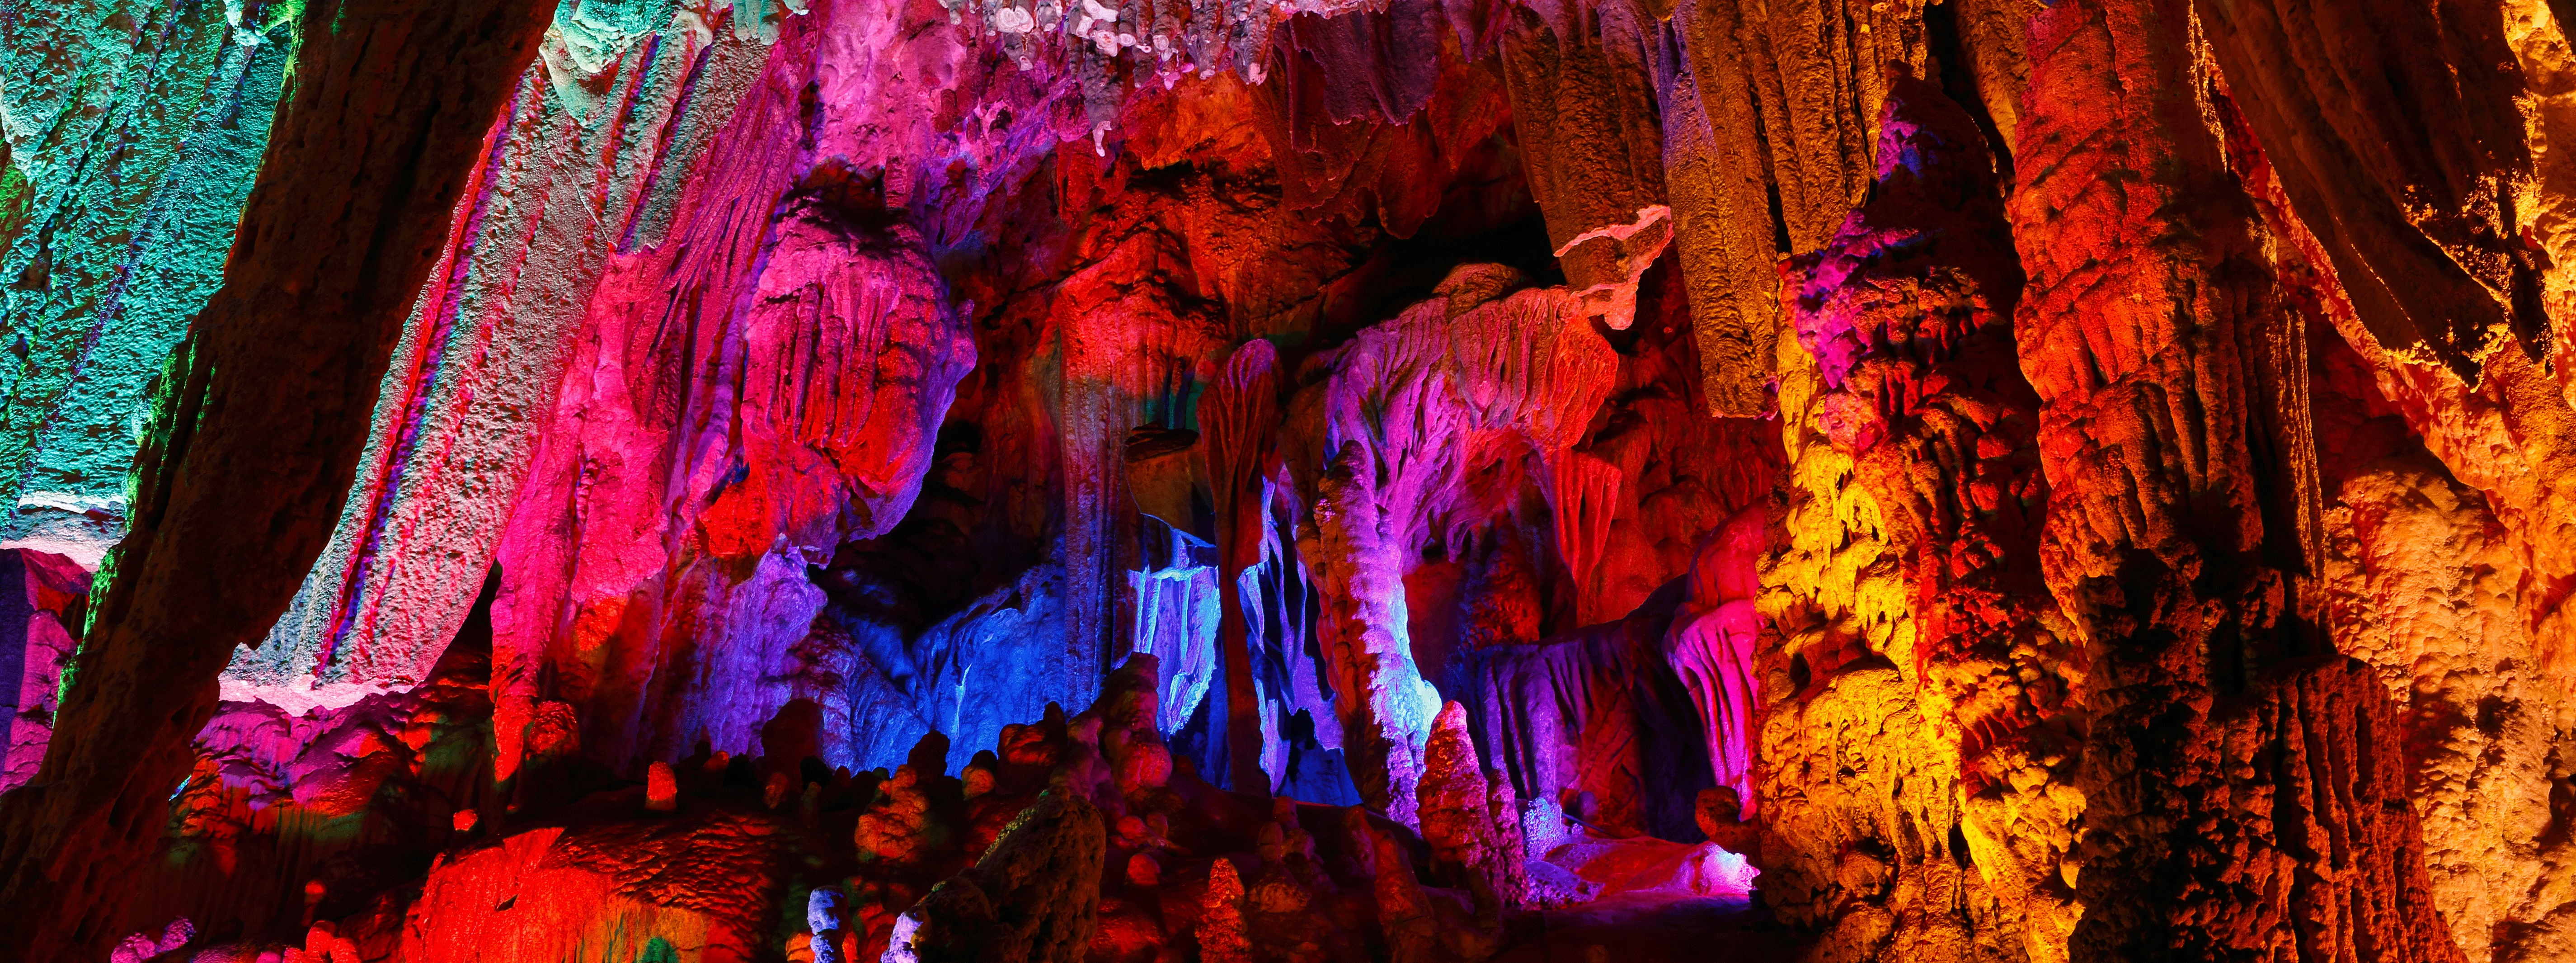 /resource//Images/china/headerimage/Reed-flute-cave-guilin-chin.png